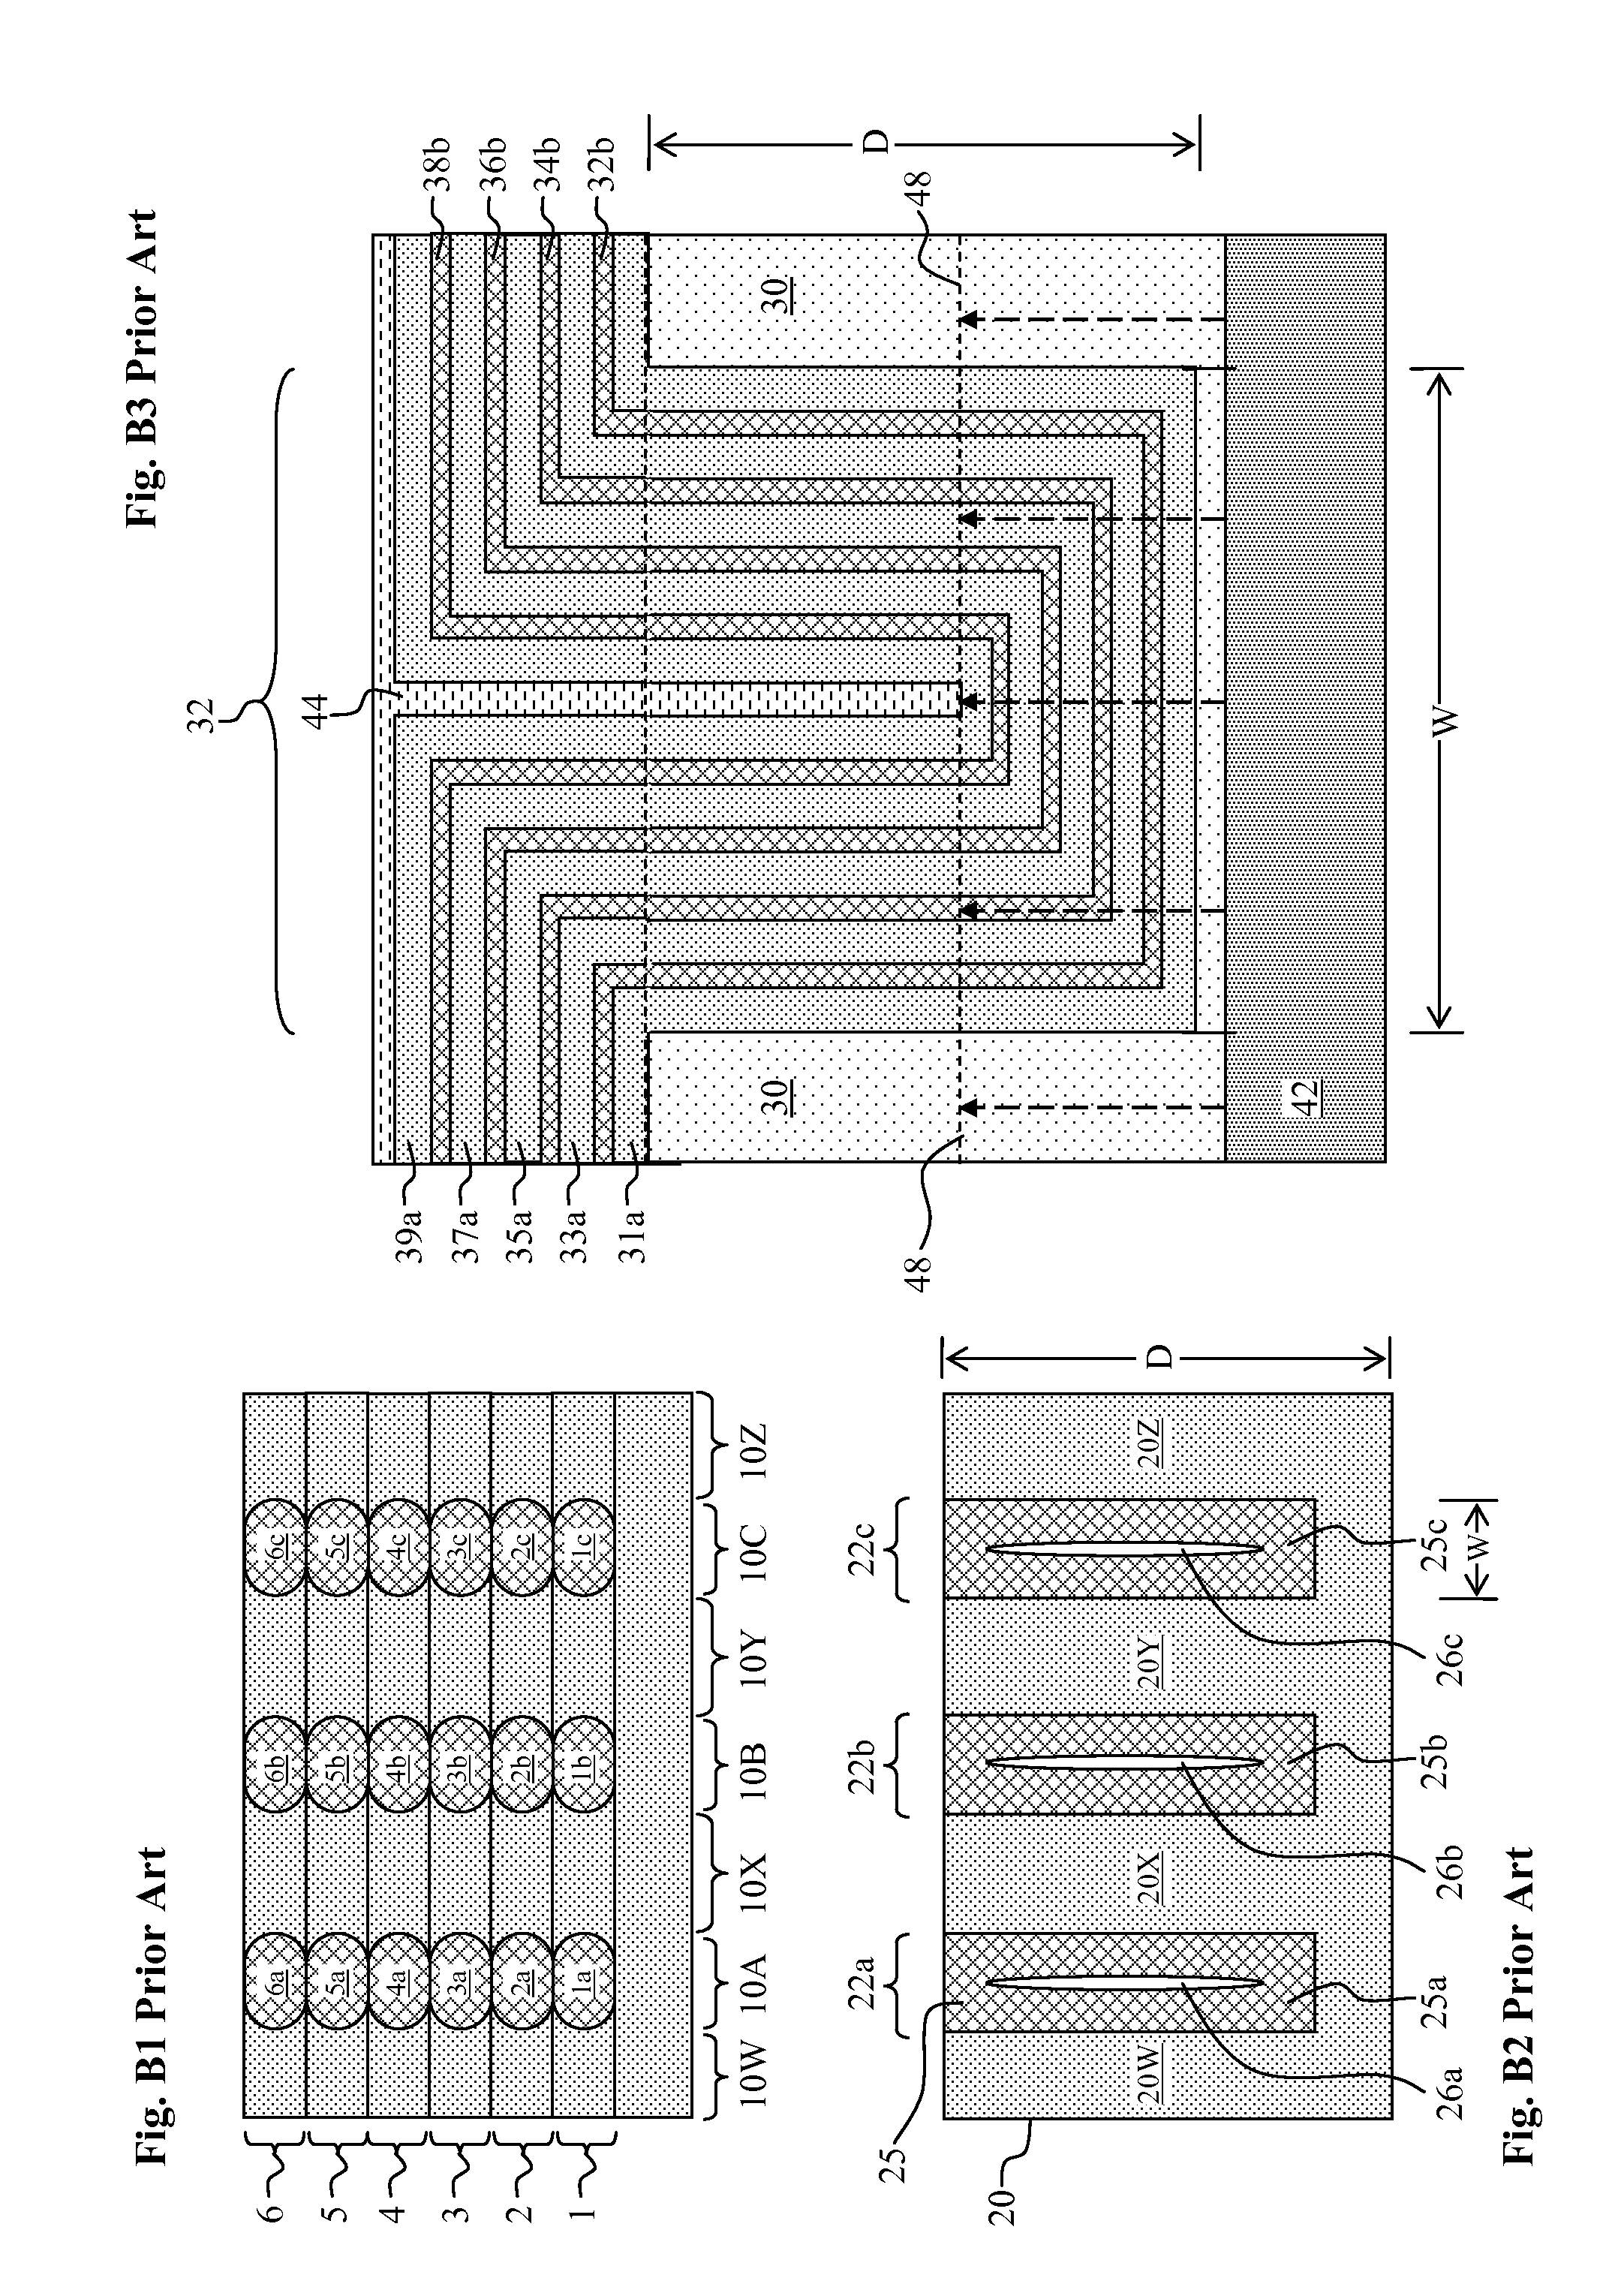 Method for making a charge balanced multi-nano shell drift region for superjunction semiconductor device